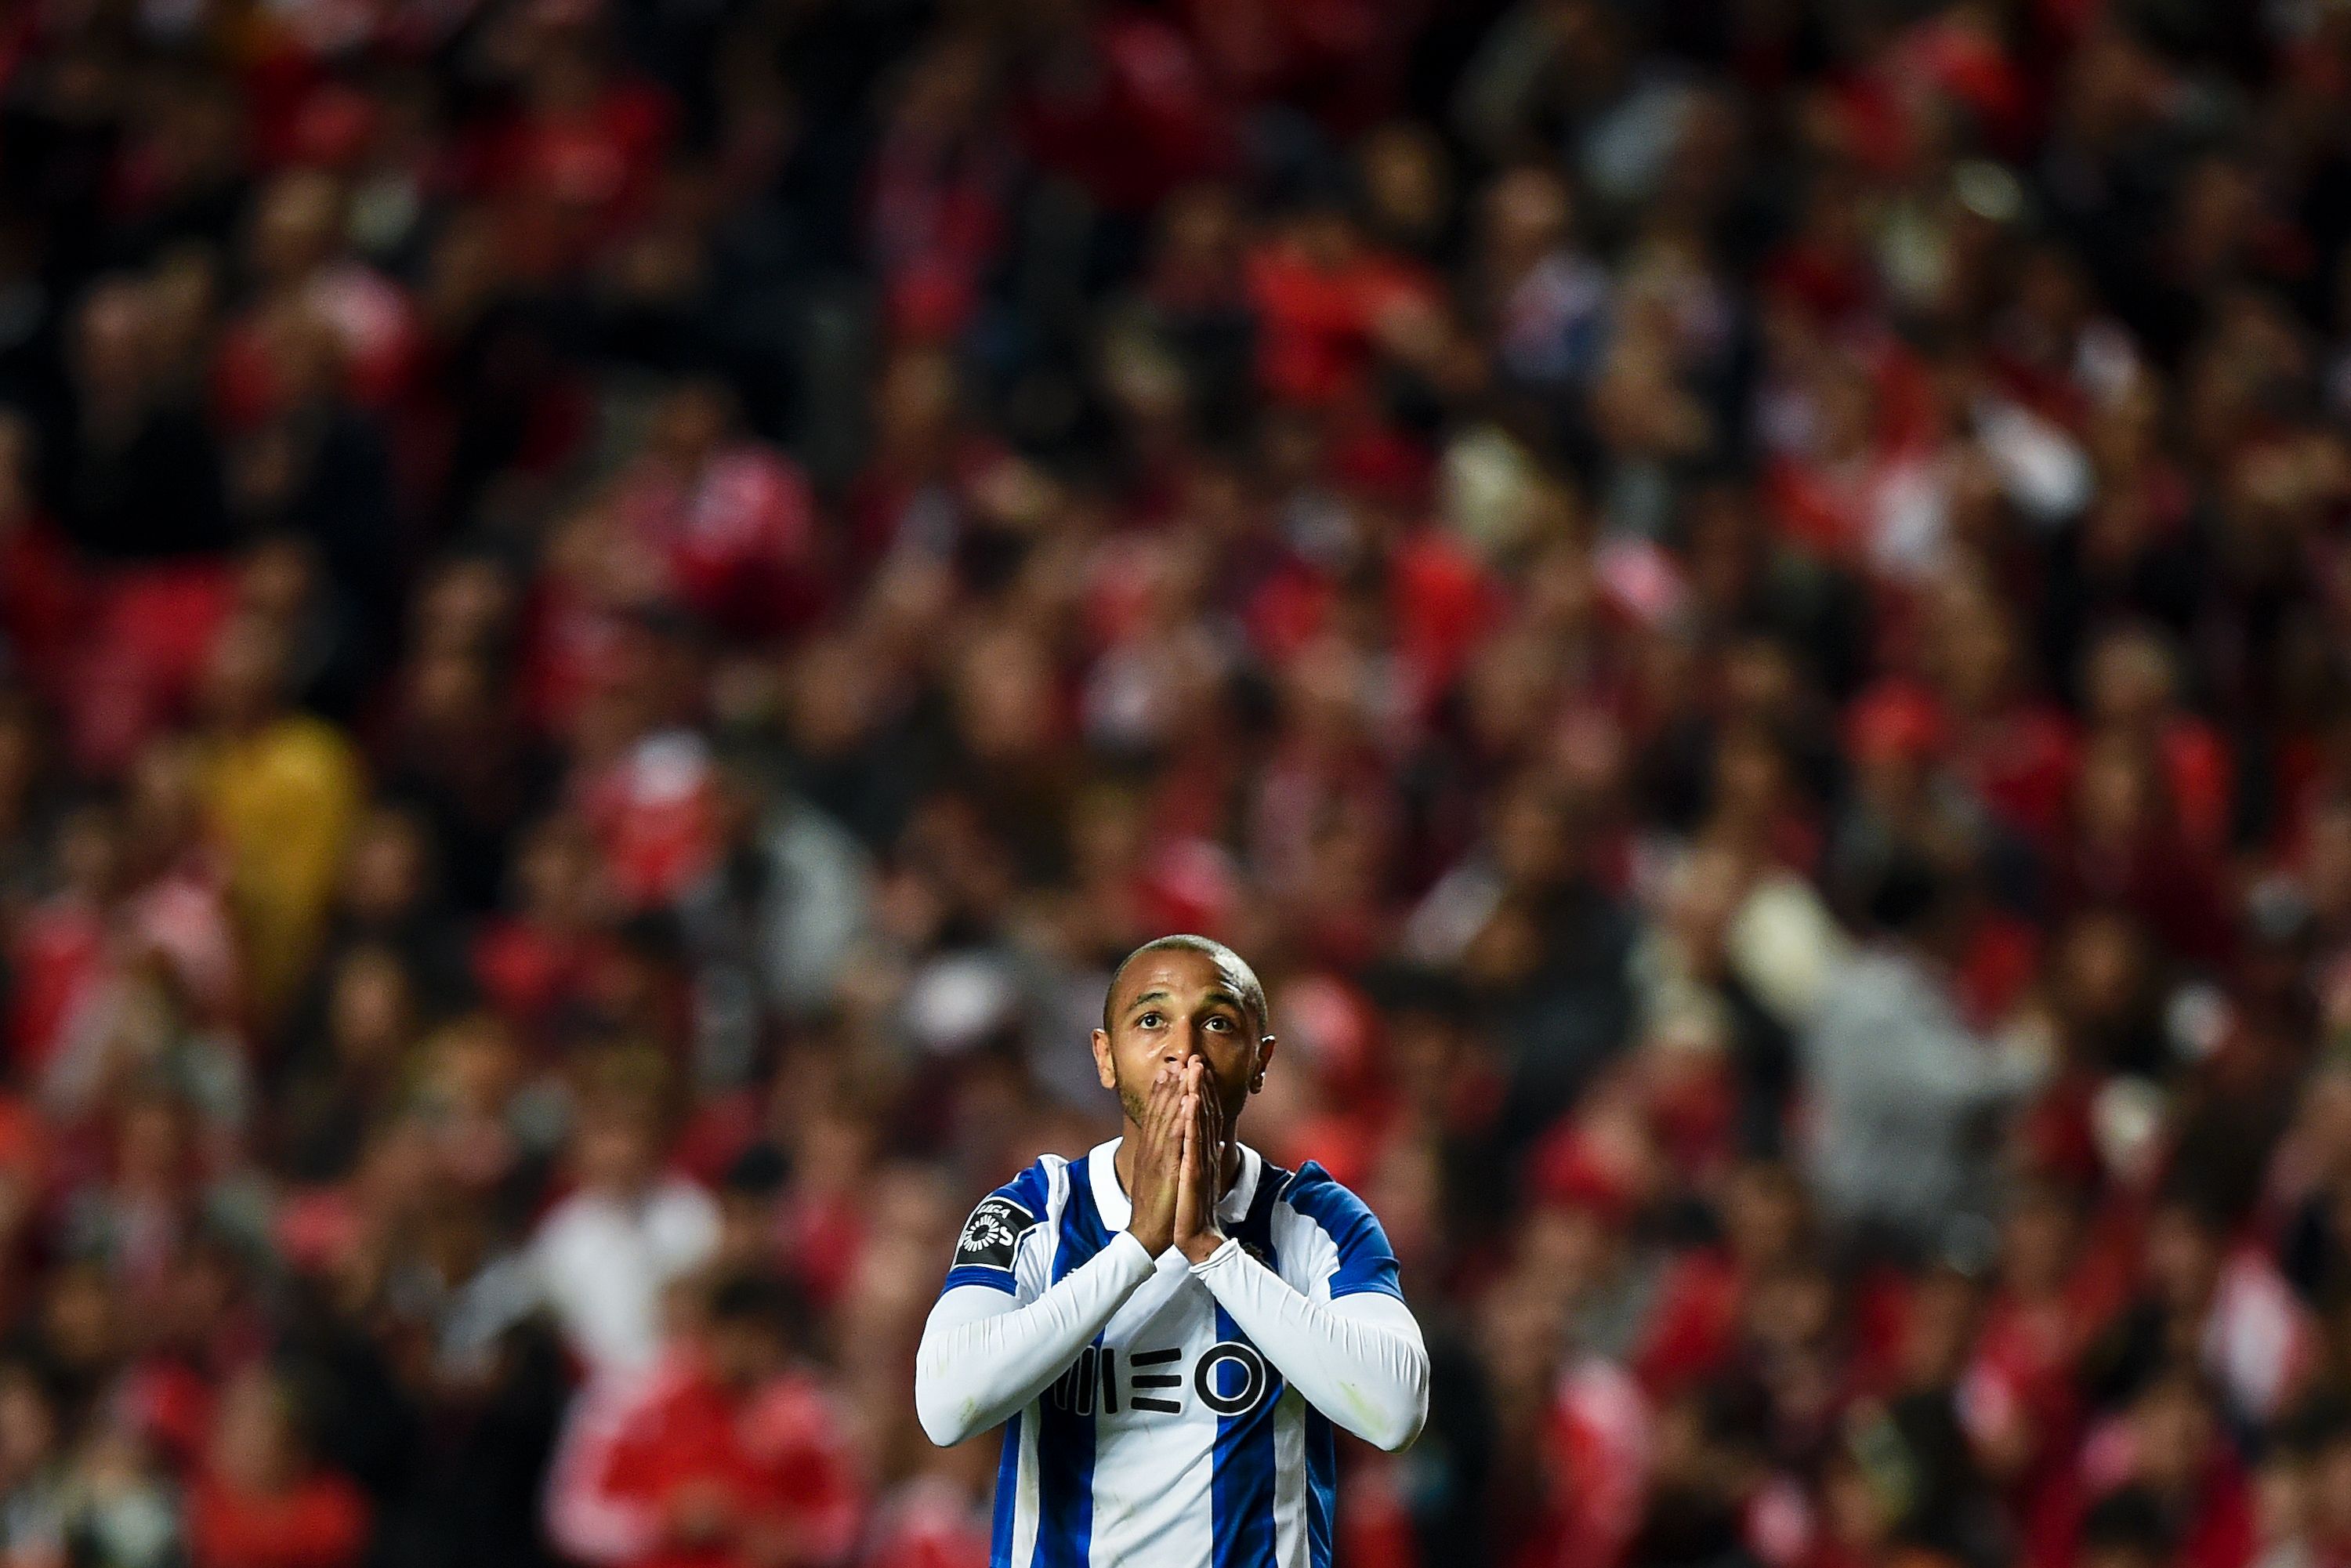 Porto's French forward Yacine Brahimi gestures after missing a goal opportunity during the Portuguese league football match SL Benfica vs FC Porto at the Luz stadium in Lisbon on April 1, 2017. / AFP PHOTO / PATRICIA DE MELO MOREIRA        (Photo credit should read PATRICIA DE MELO MOREIRA/AFP/Getty Images)